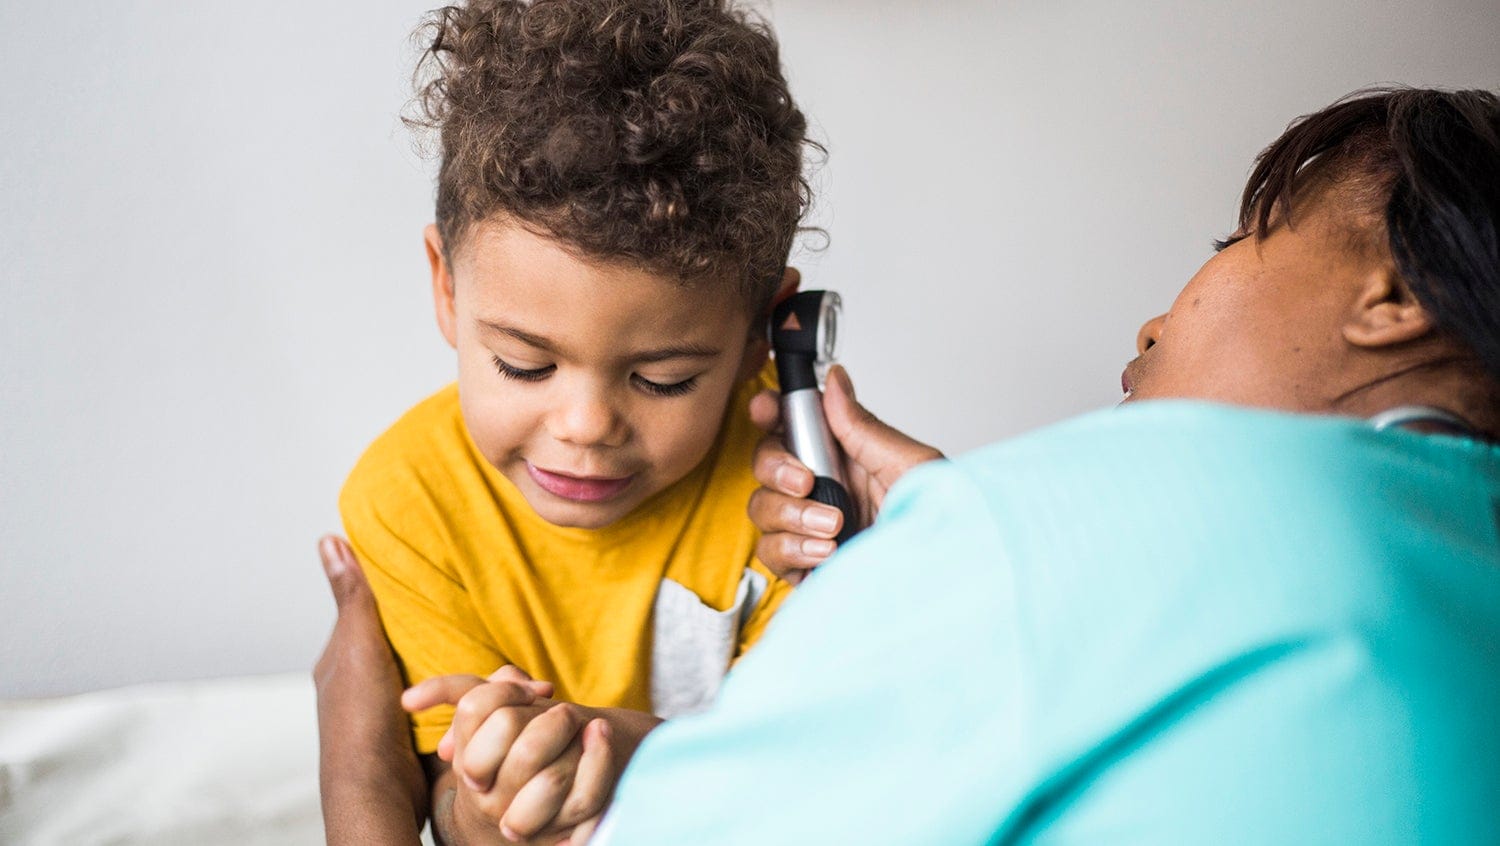 a ear nose and throat doctor checks a child's ear